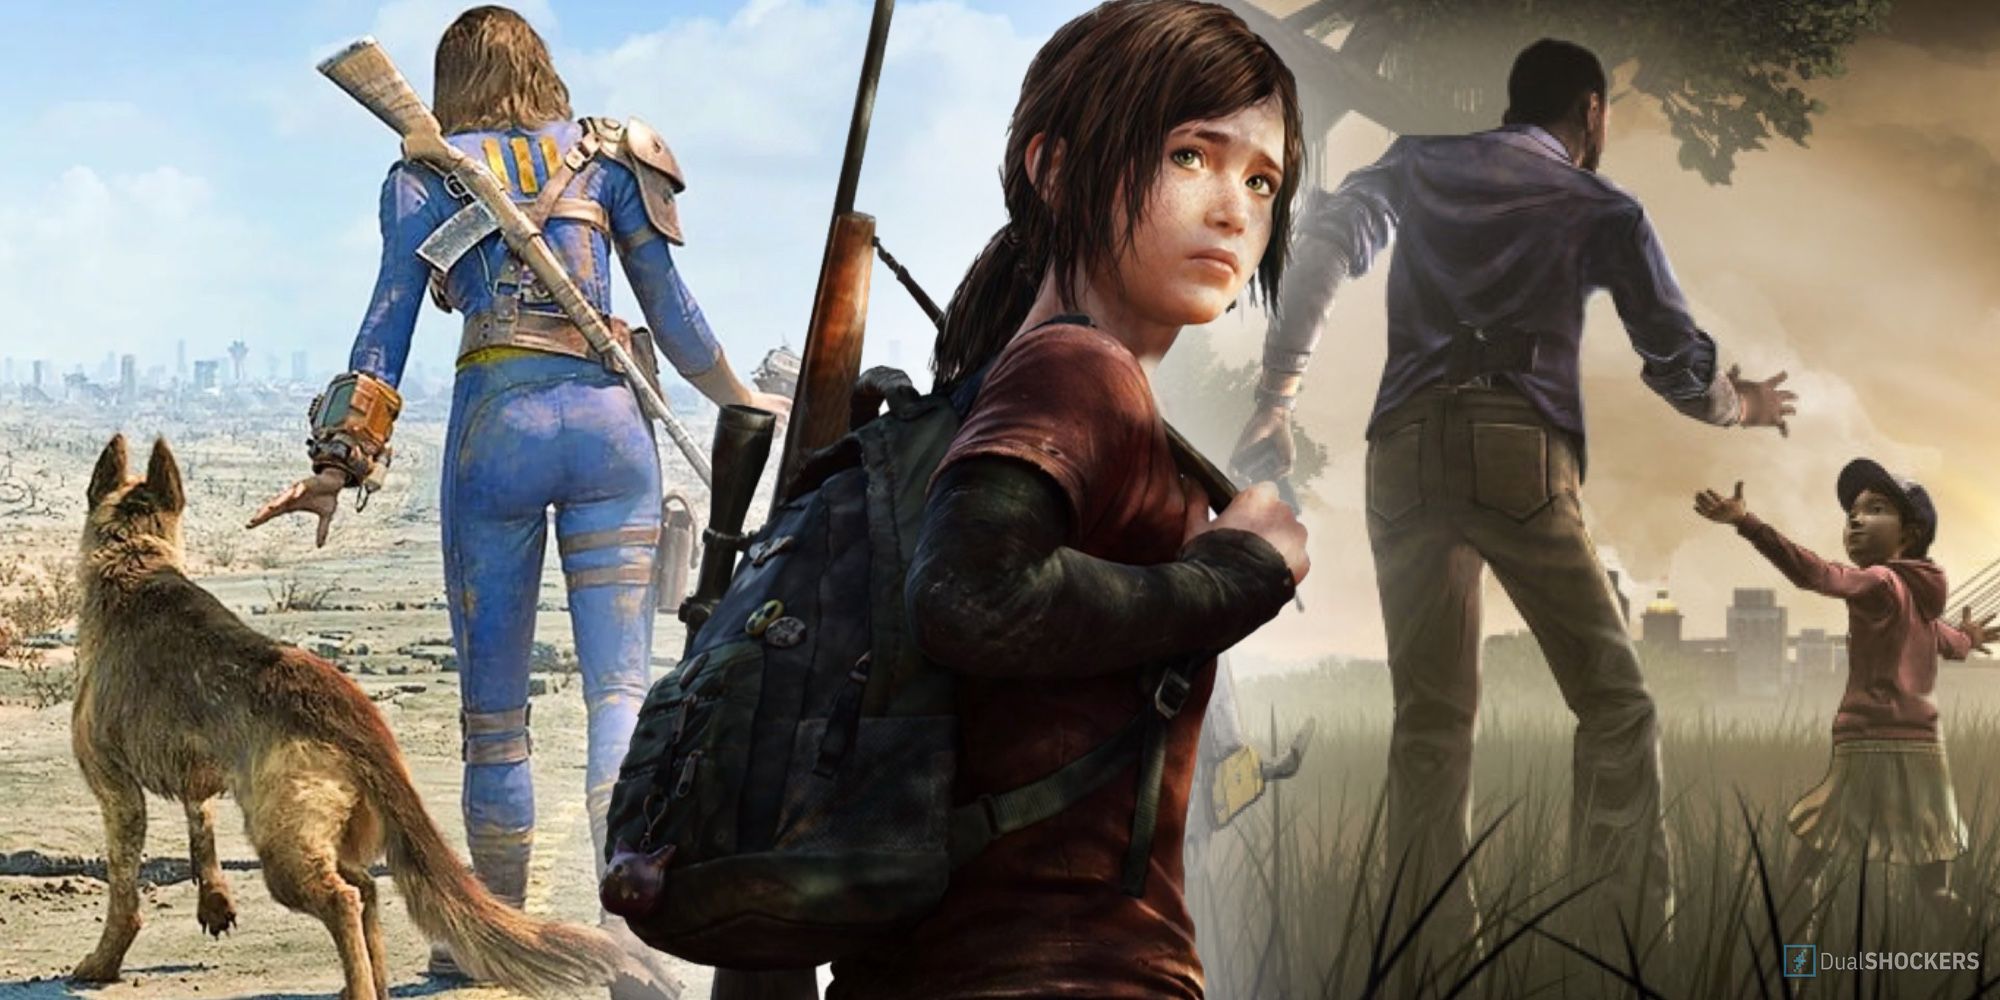 5 Apocalyptic Games to Play to Get Your 'The Last of Us' Fix - FandomWire